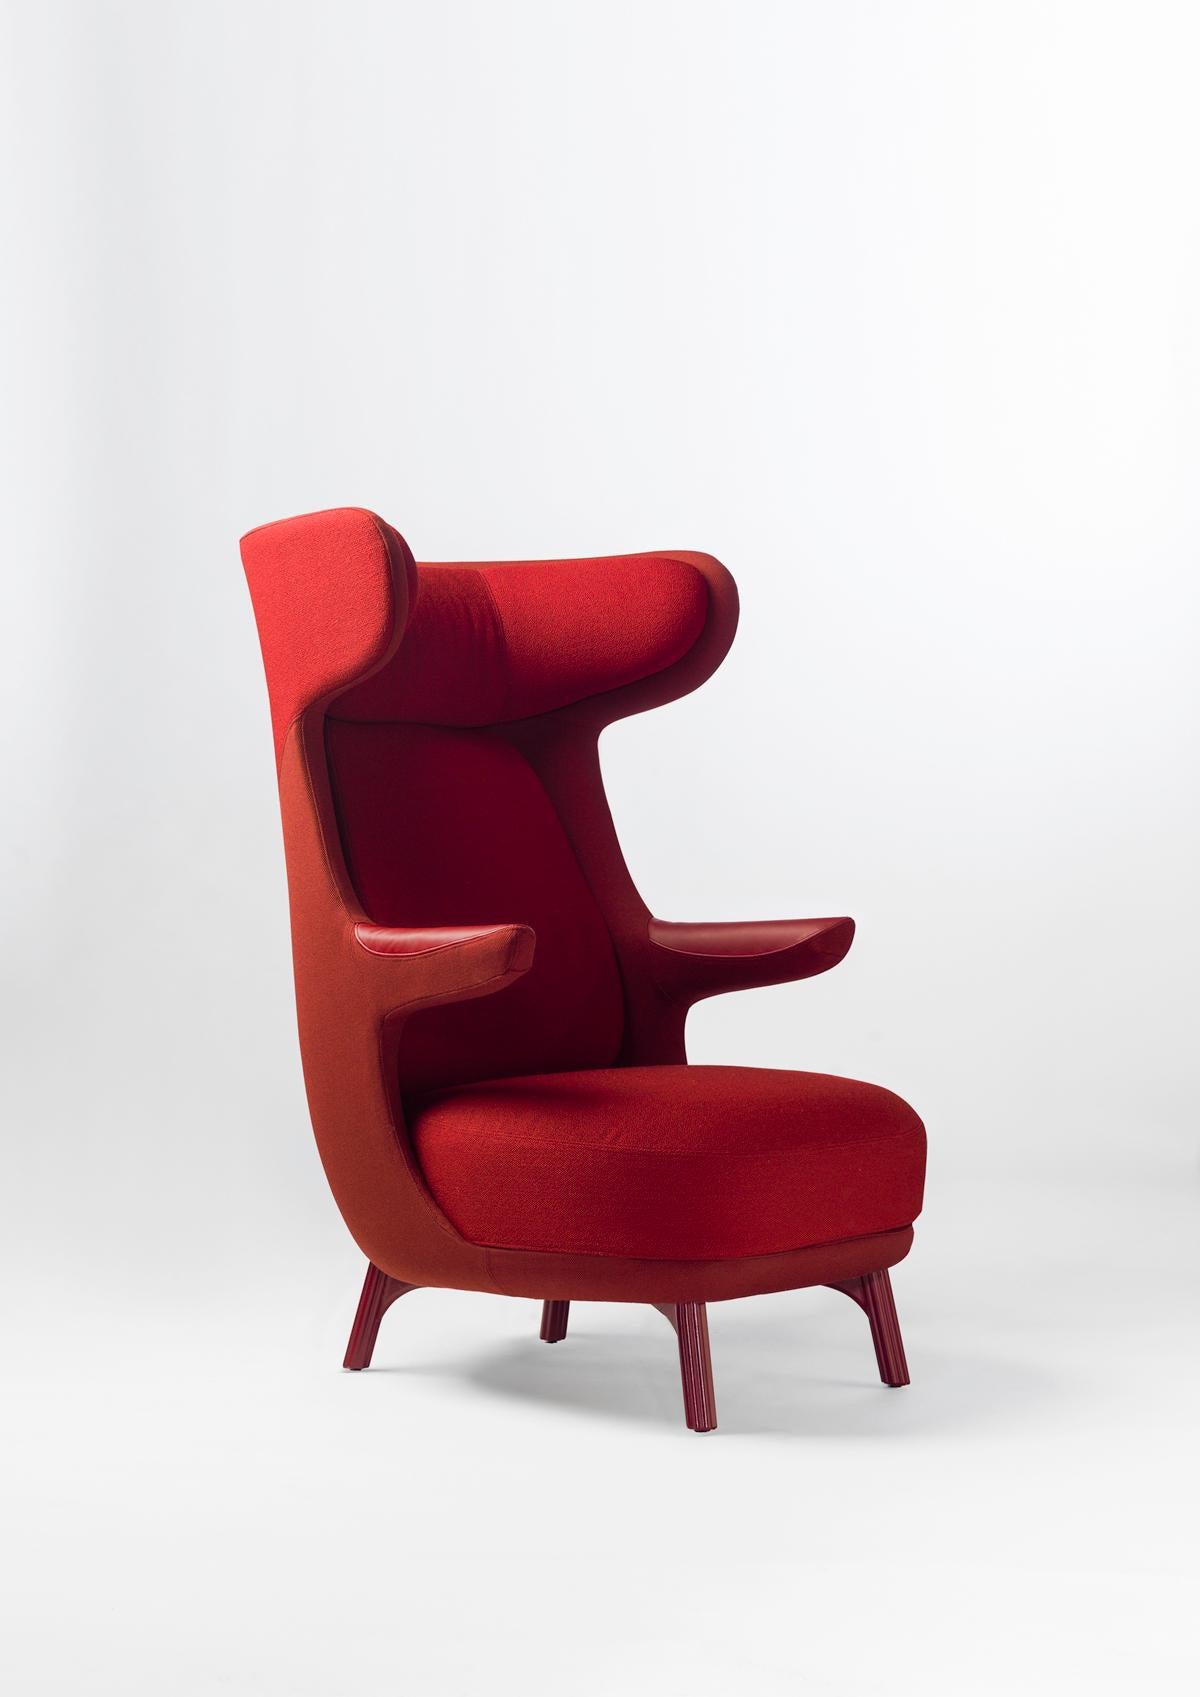 A new armchair by Jaime Hayon will convert into a classic. As comfortable as possible within certain dimensions that adapt well to the body and space it’s in, for both home and contract. It has sculptural forms and a lovely profile, similar to that